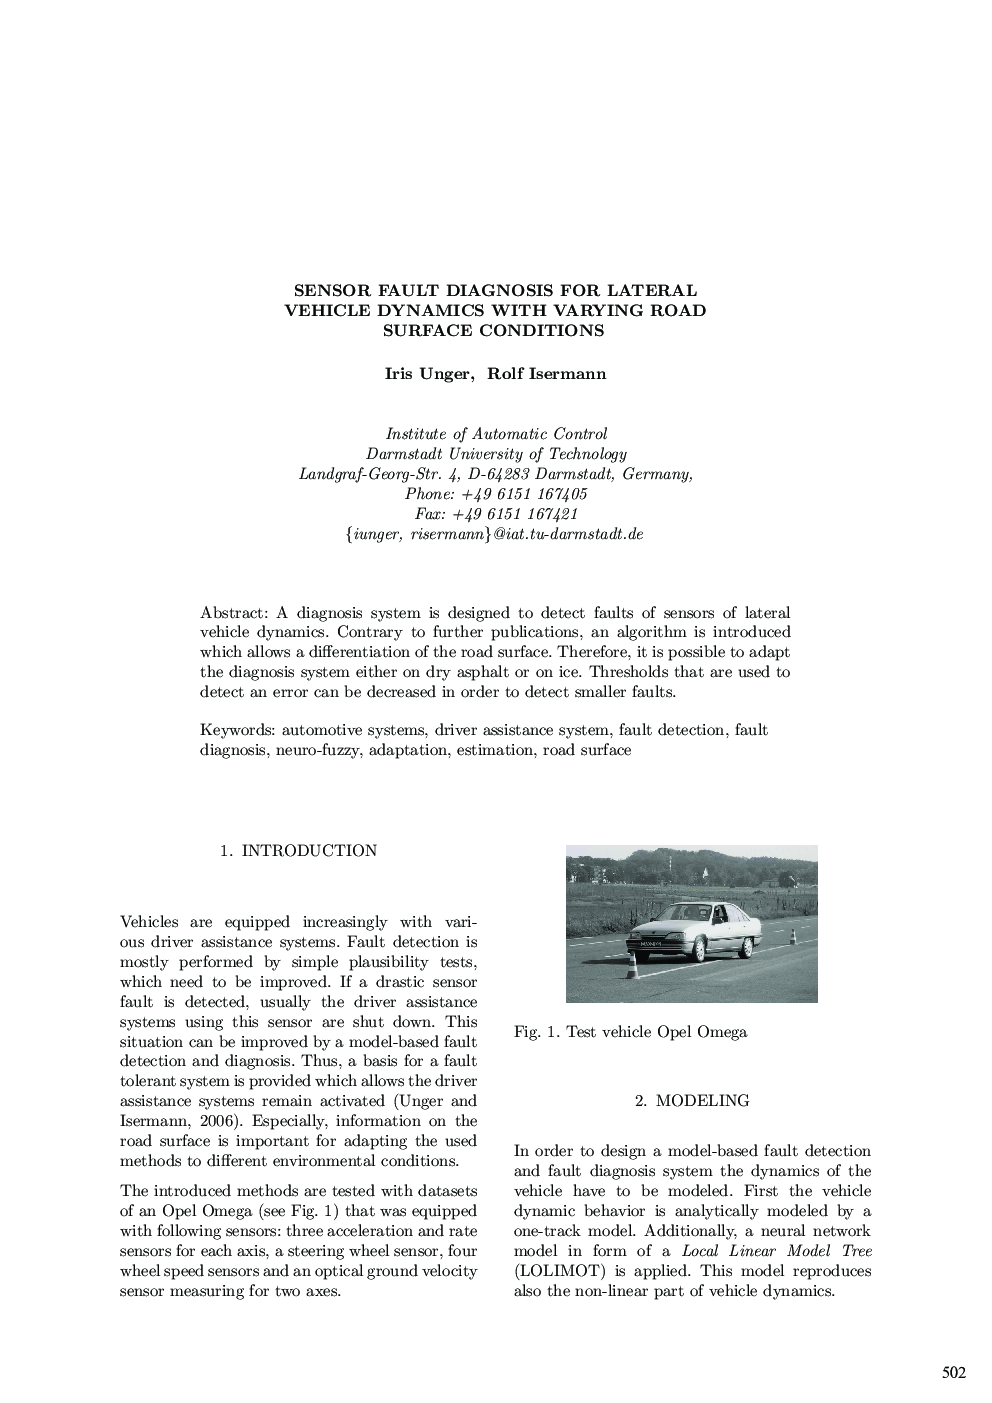 SENSOR FAULT DIAGNOSIS FOR LATERAL VEHICLE DYNAMICS WITH VARYING ROAD SURFACE CONDITIONS